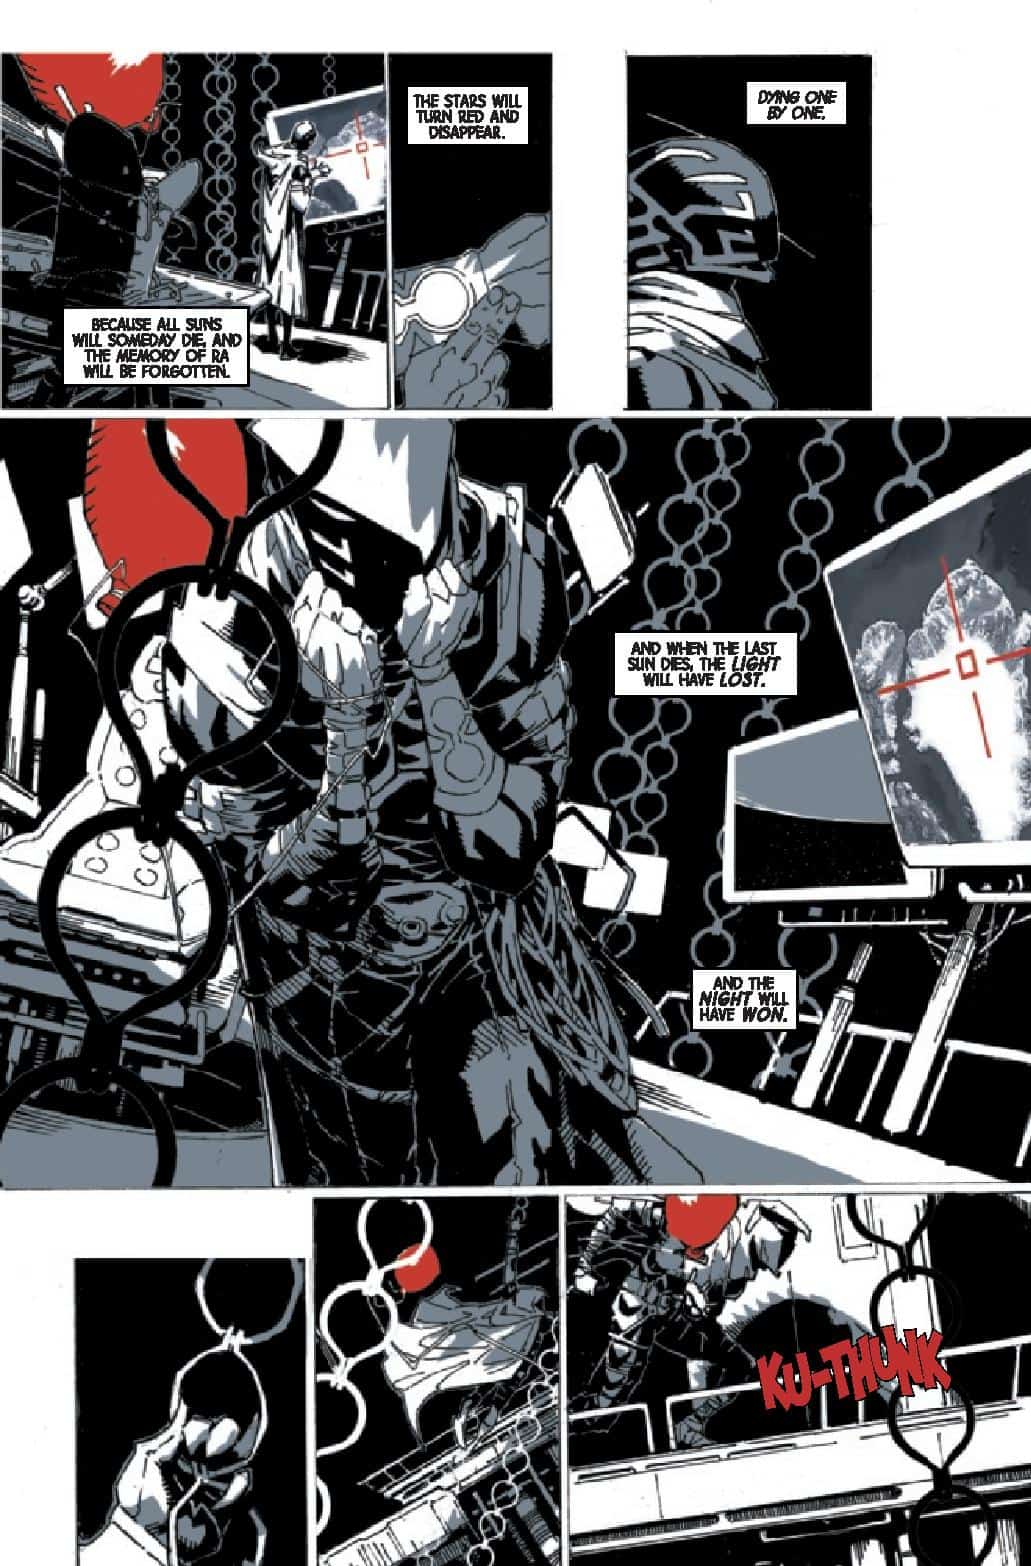 Moon Knight First Reviews: New Marvel Series Is a Dark, Bloody